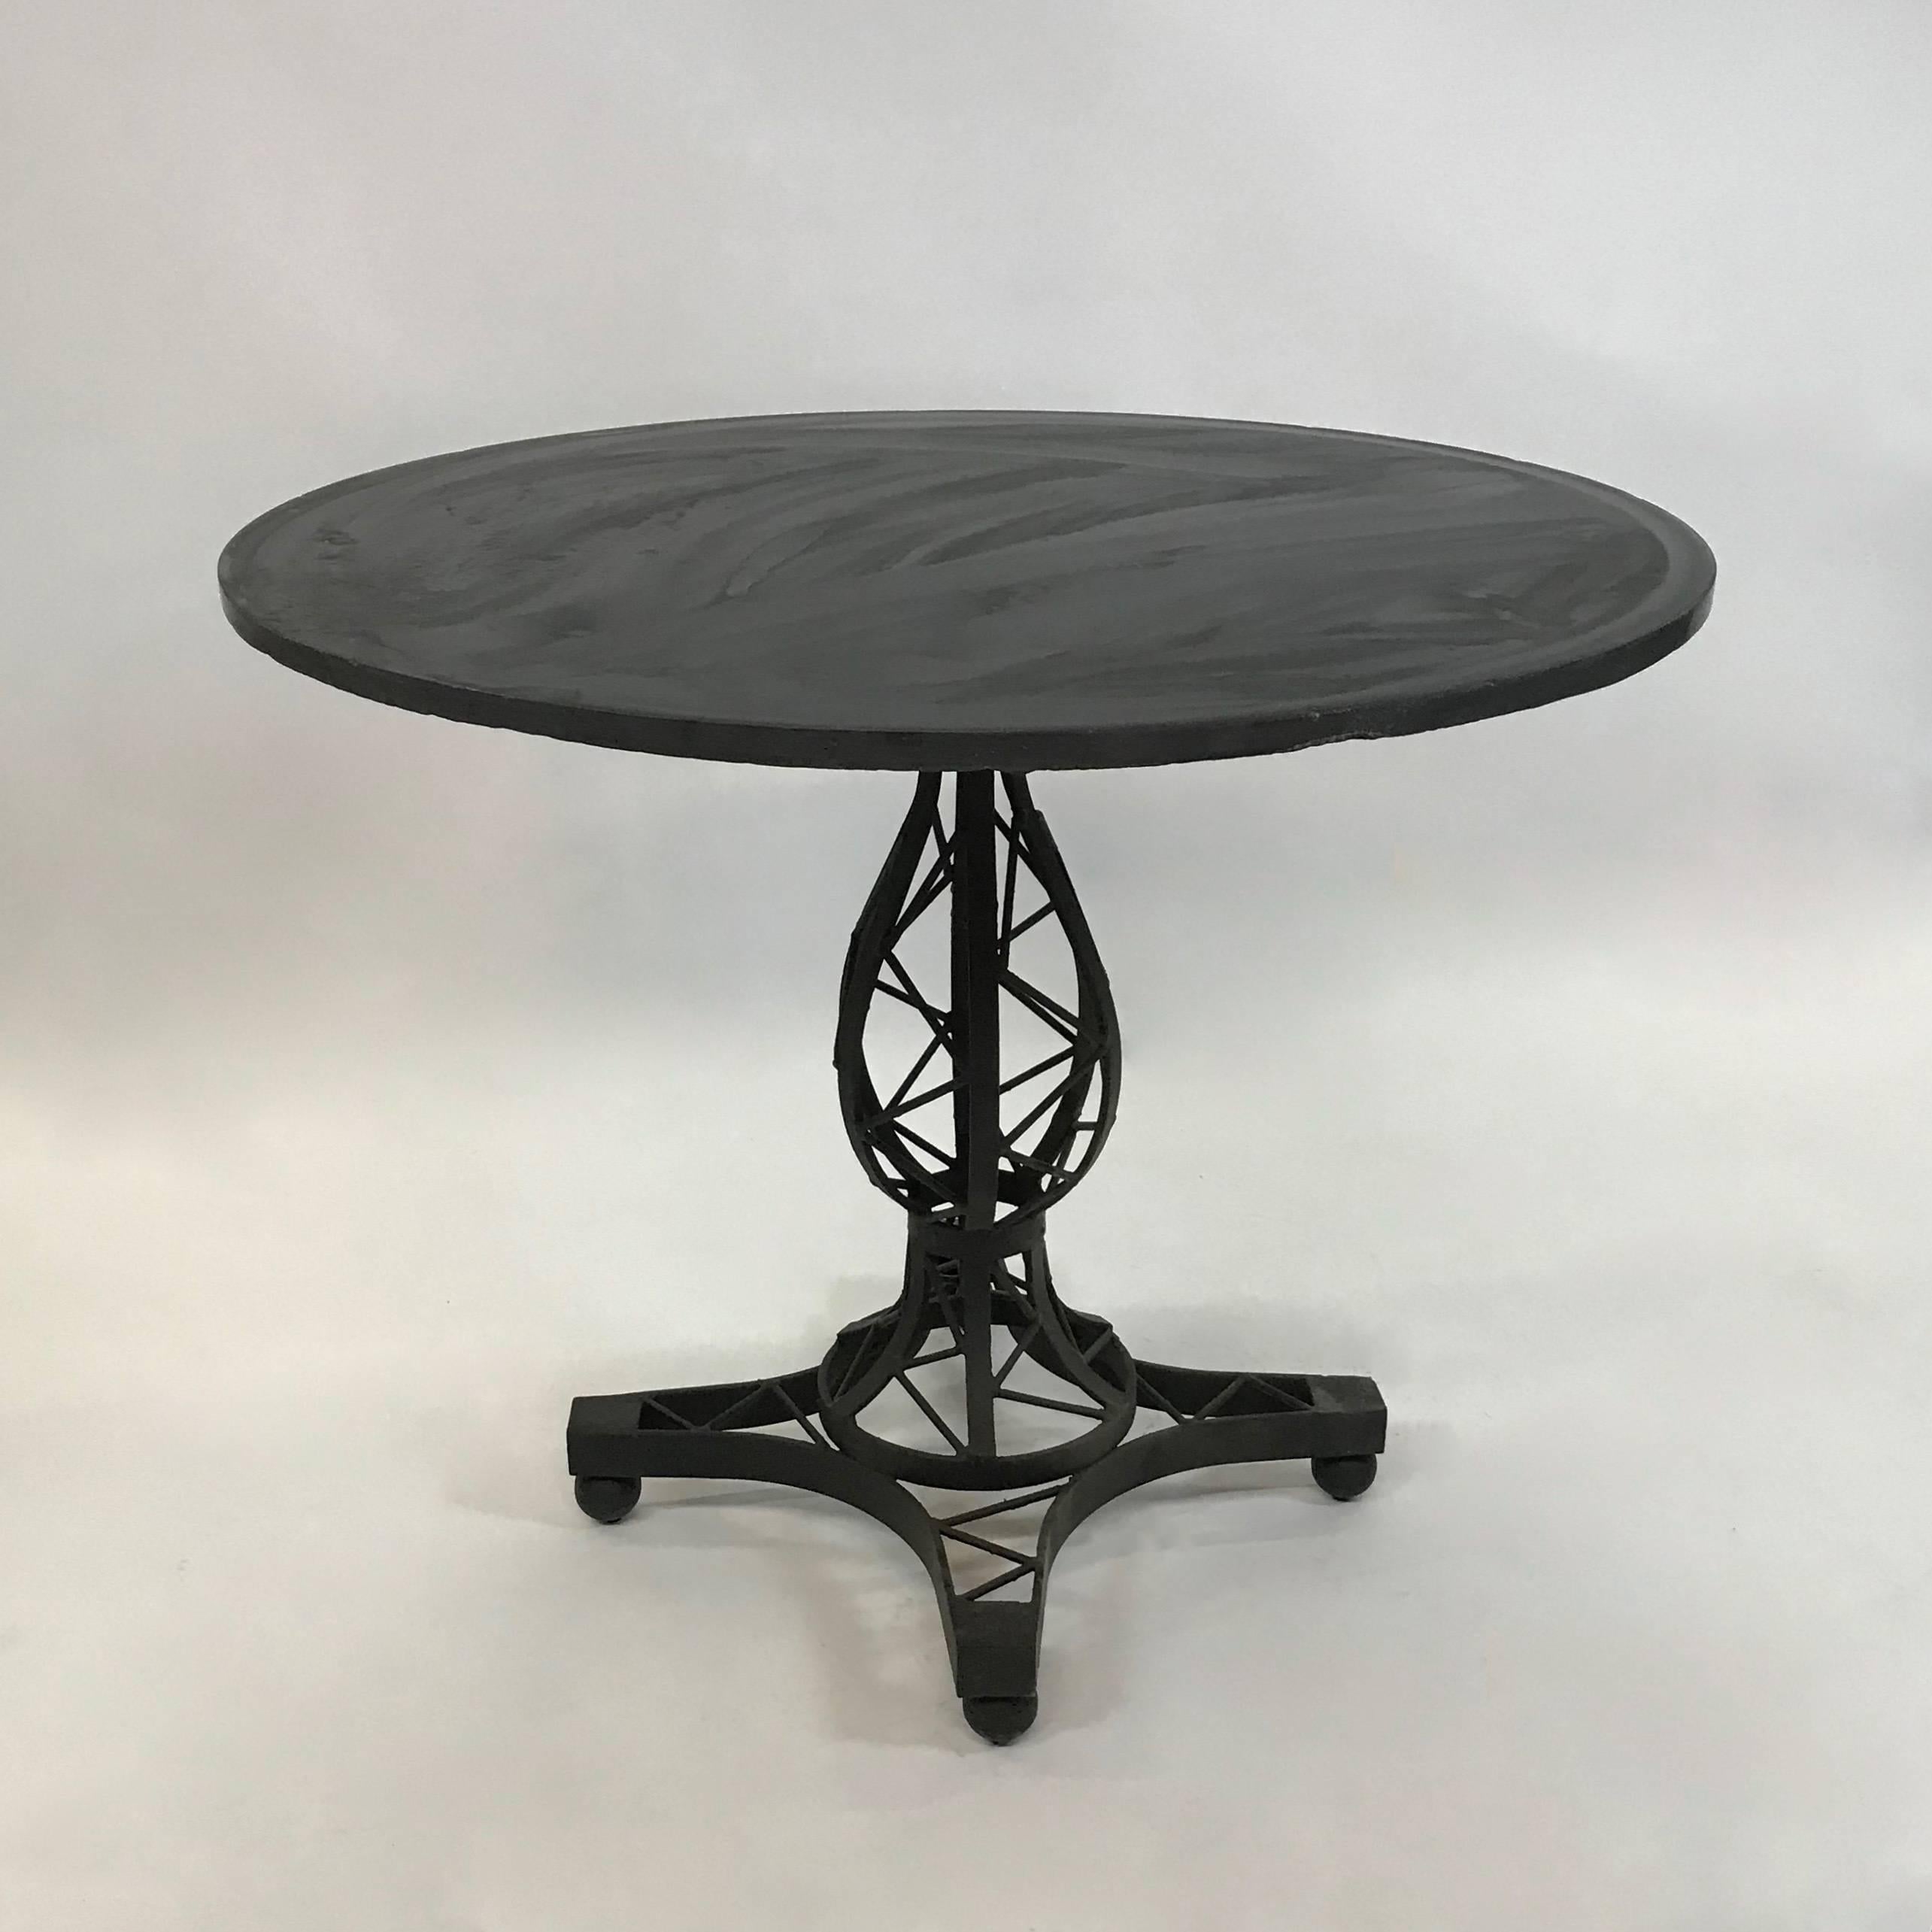 Midcentury, café, bistro, dining table features a 36 inch round black slate top with unusual, woven wrought iron, Brutalist, pedestal base.